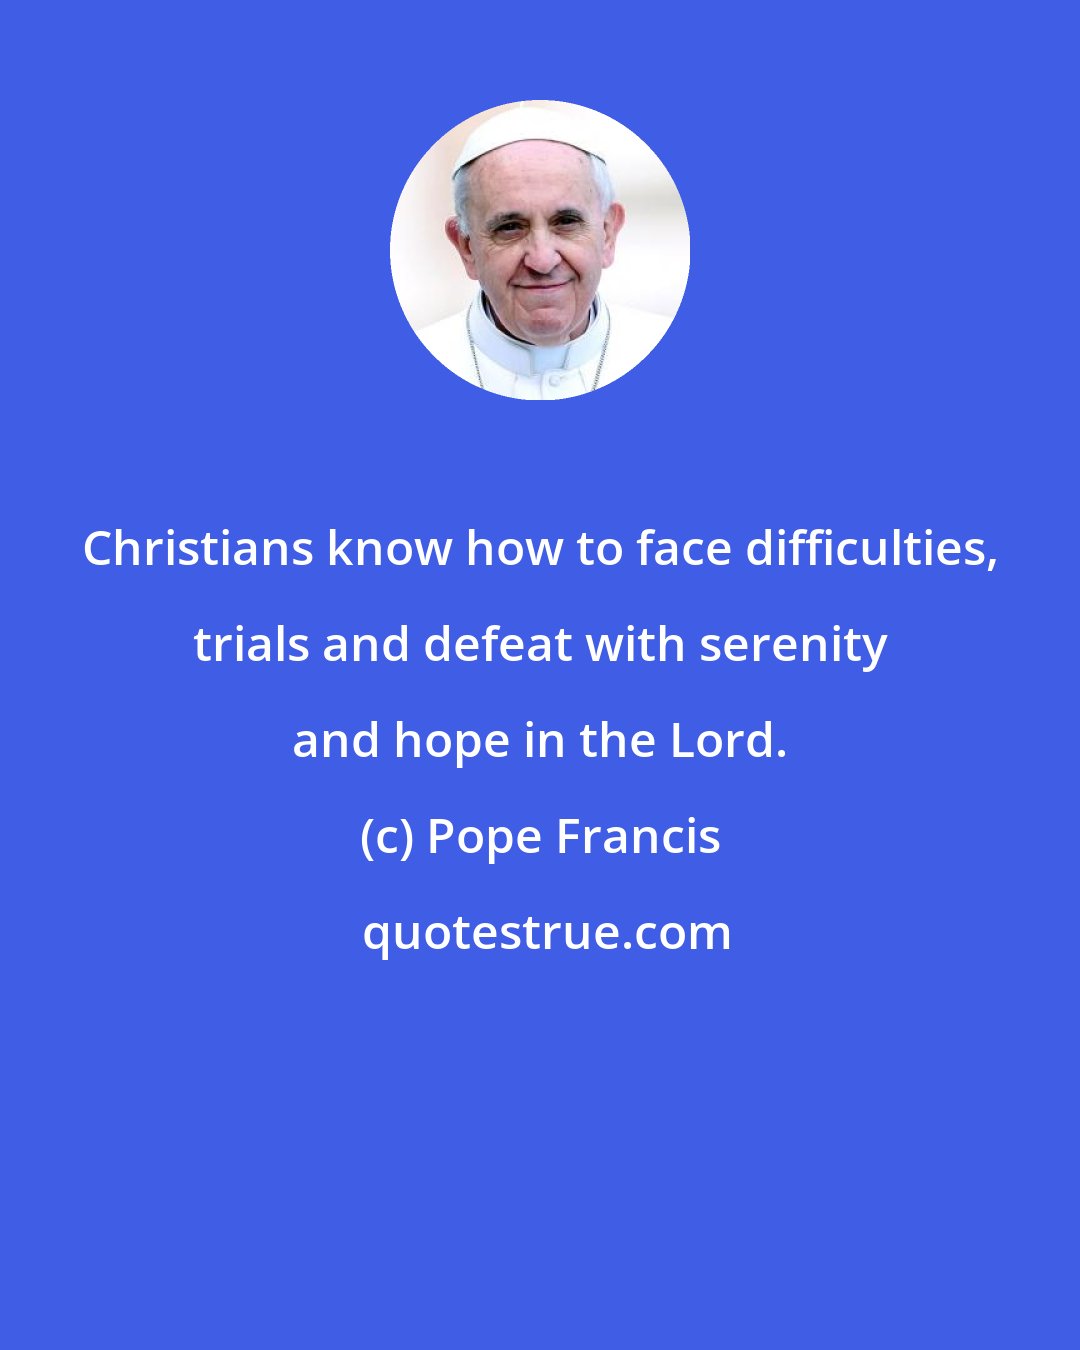 Pope Francis: Christians know how to face difficulties, trials and defeat with serenity and hope in the Lord.